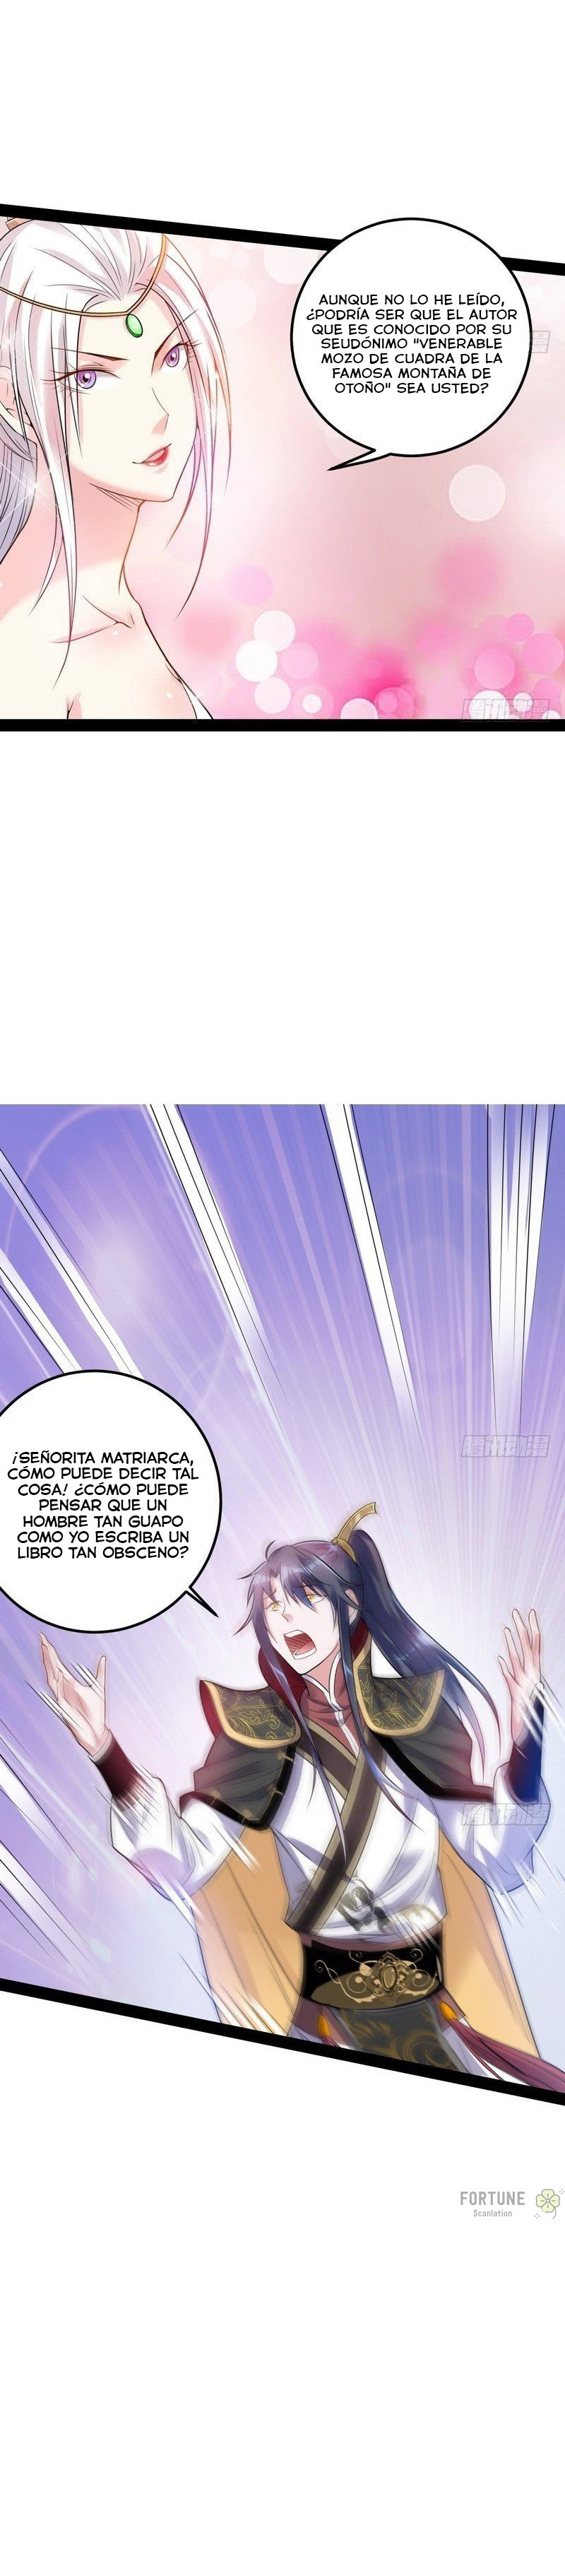 Manga Soy un dios maligno Chapter 10 image number 8